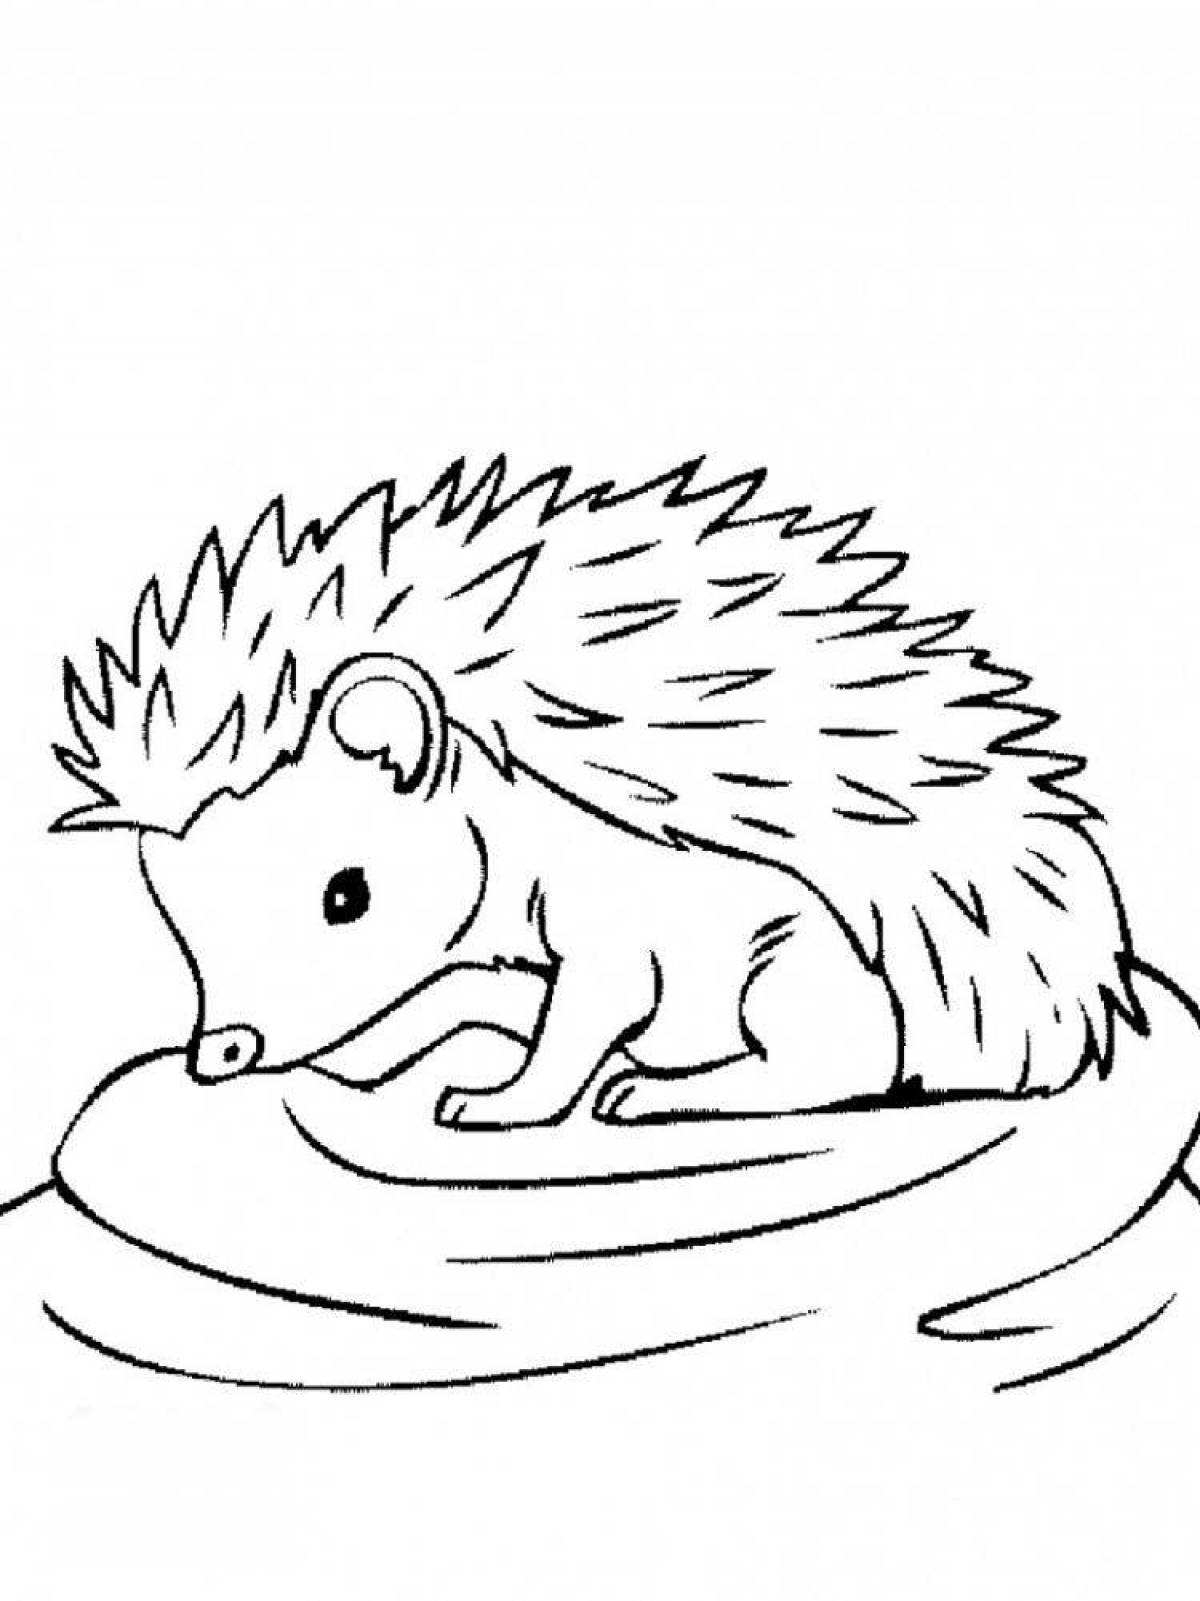 Coloring book bright and smiling hedgehog